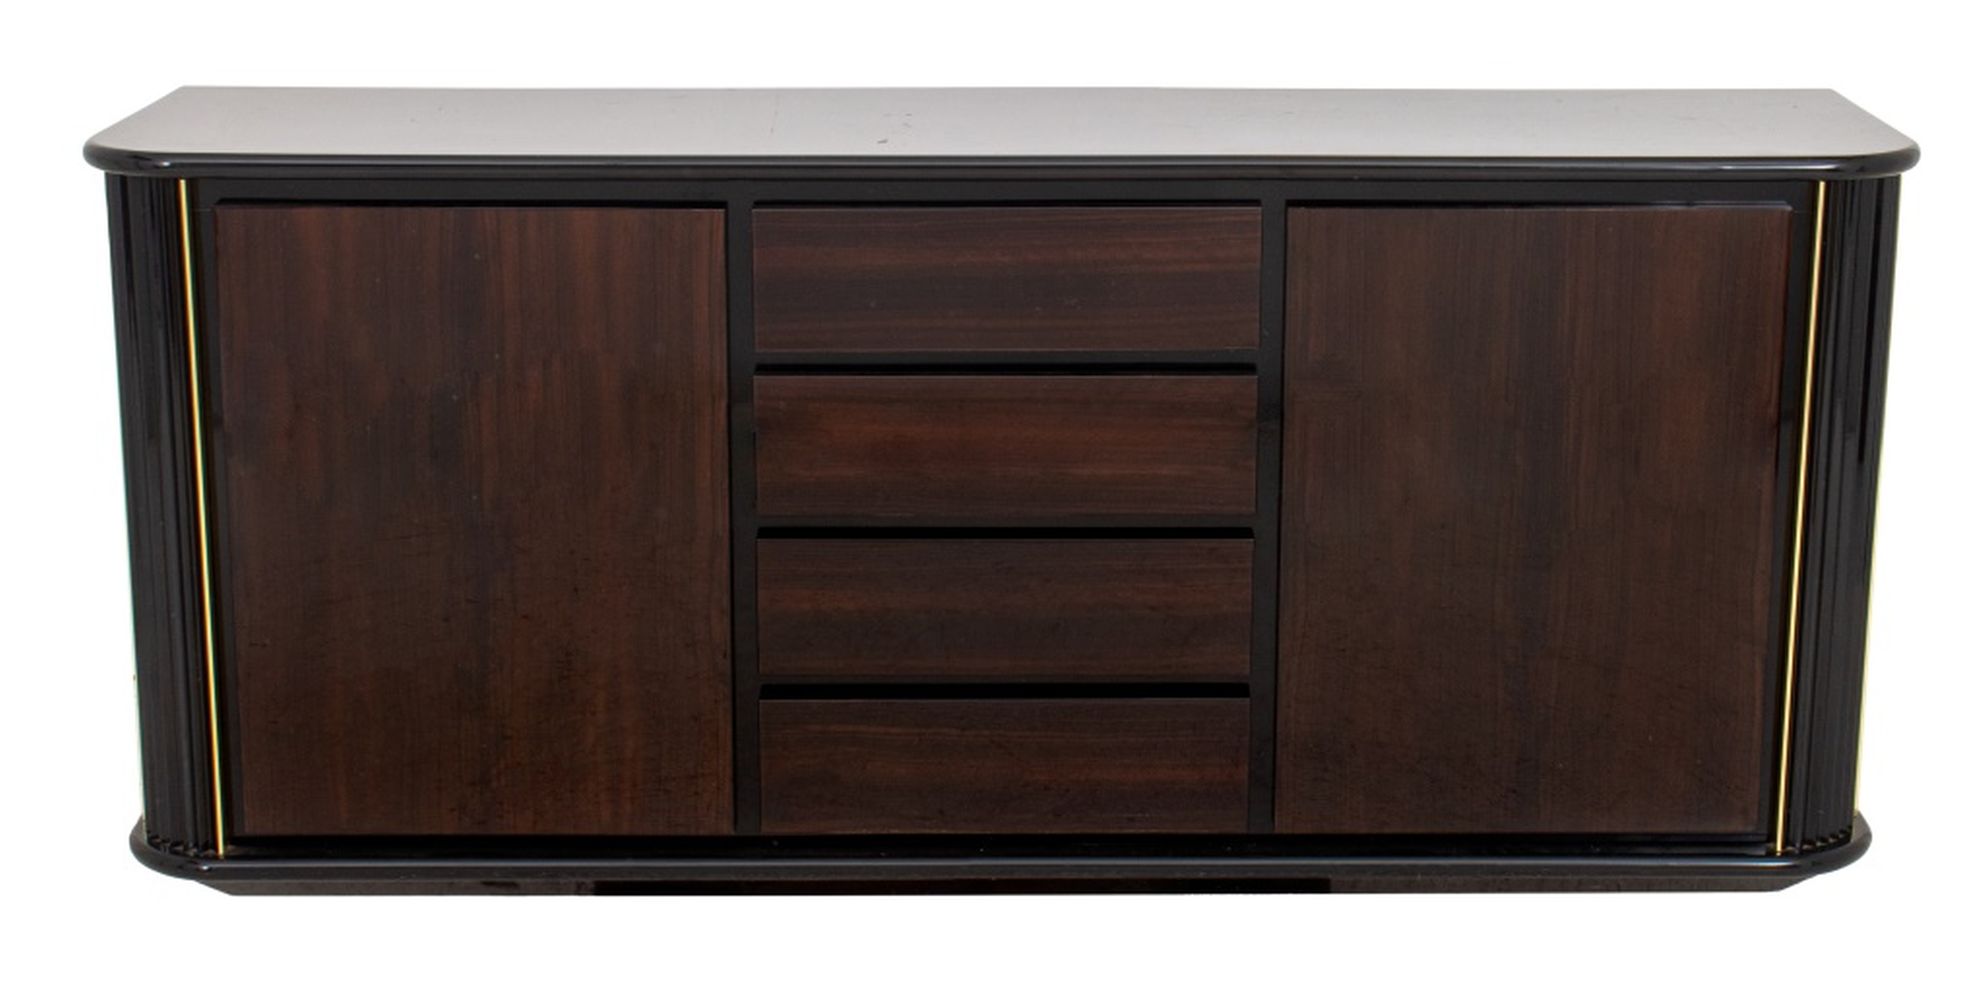 ITALIAN LACQUERED FAUX ROSEWOOD 30c619